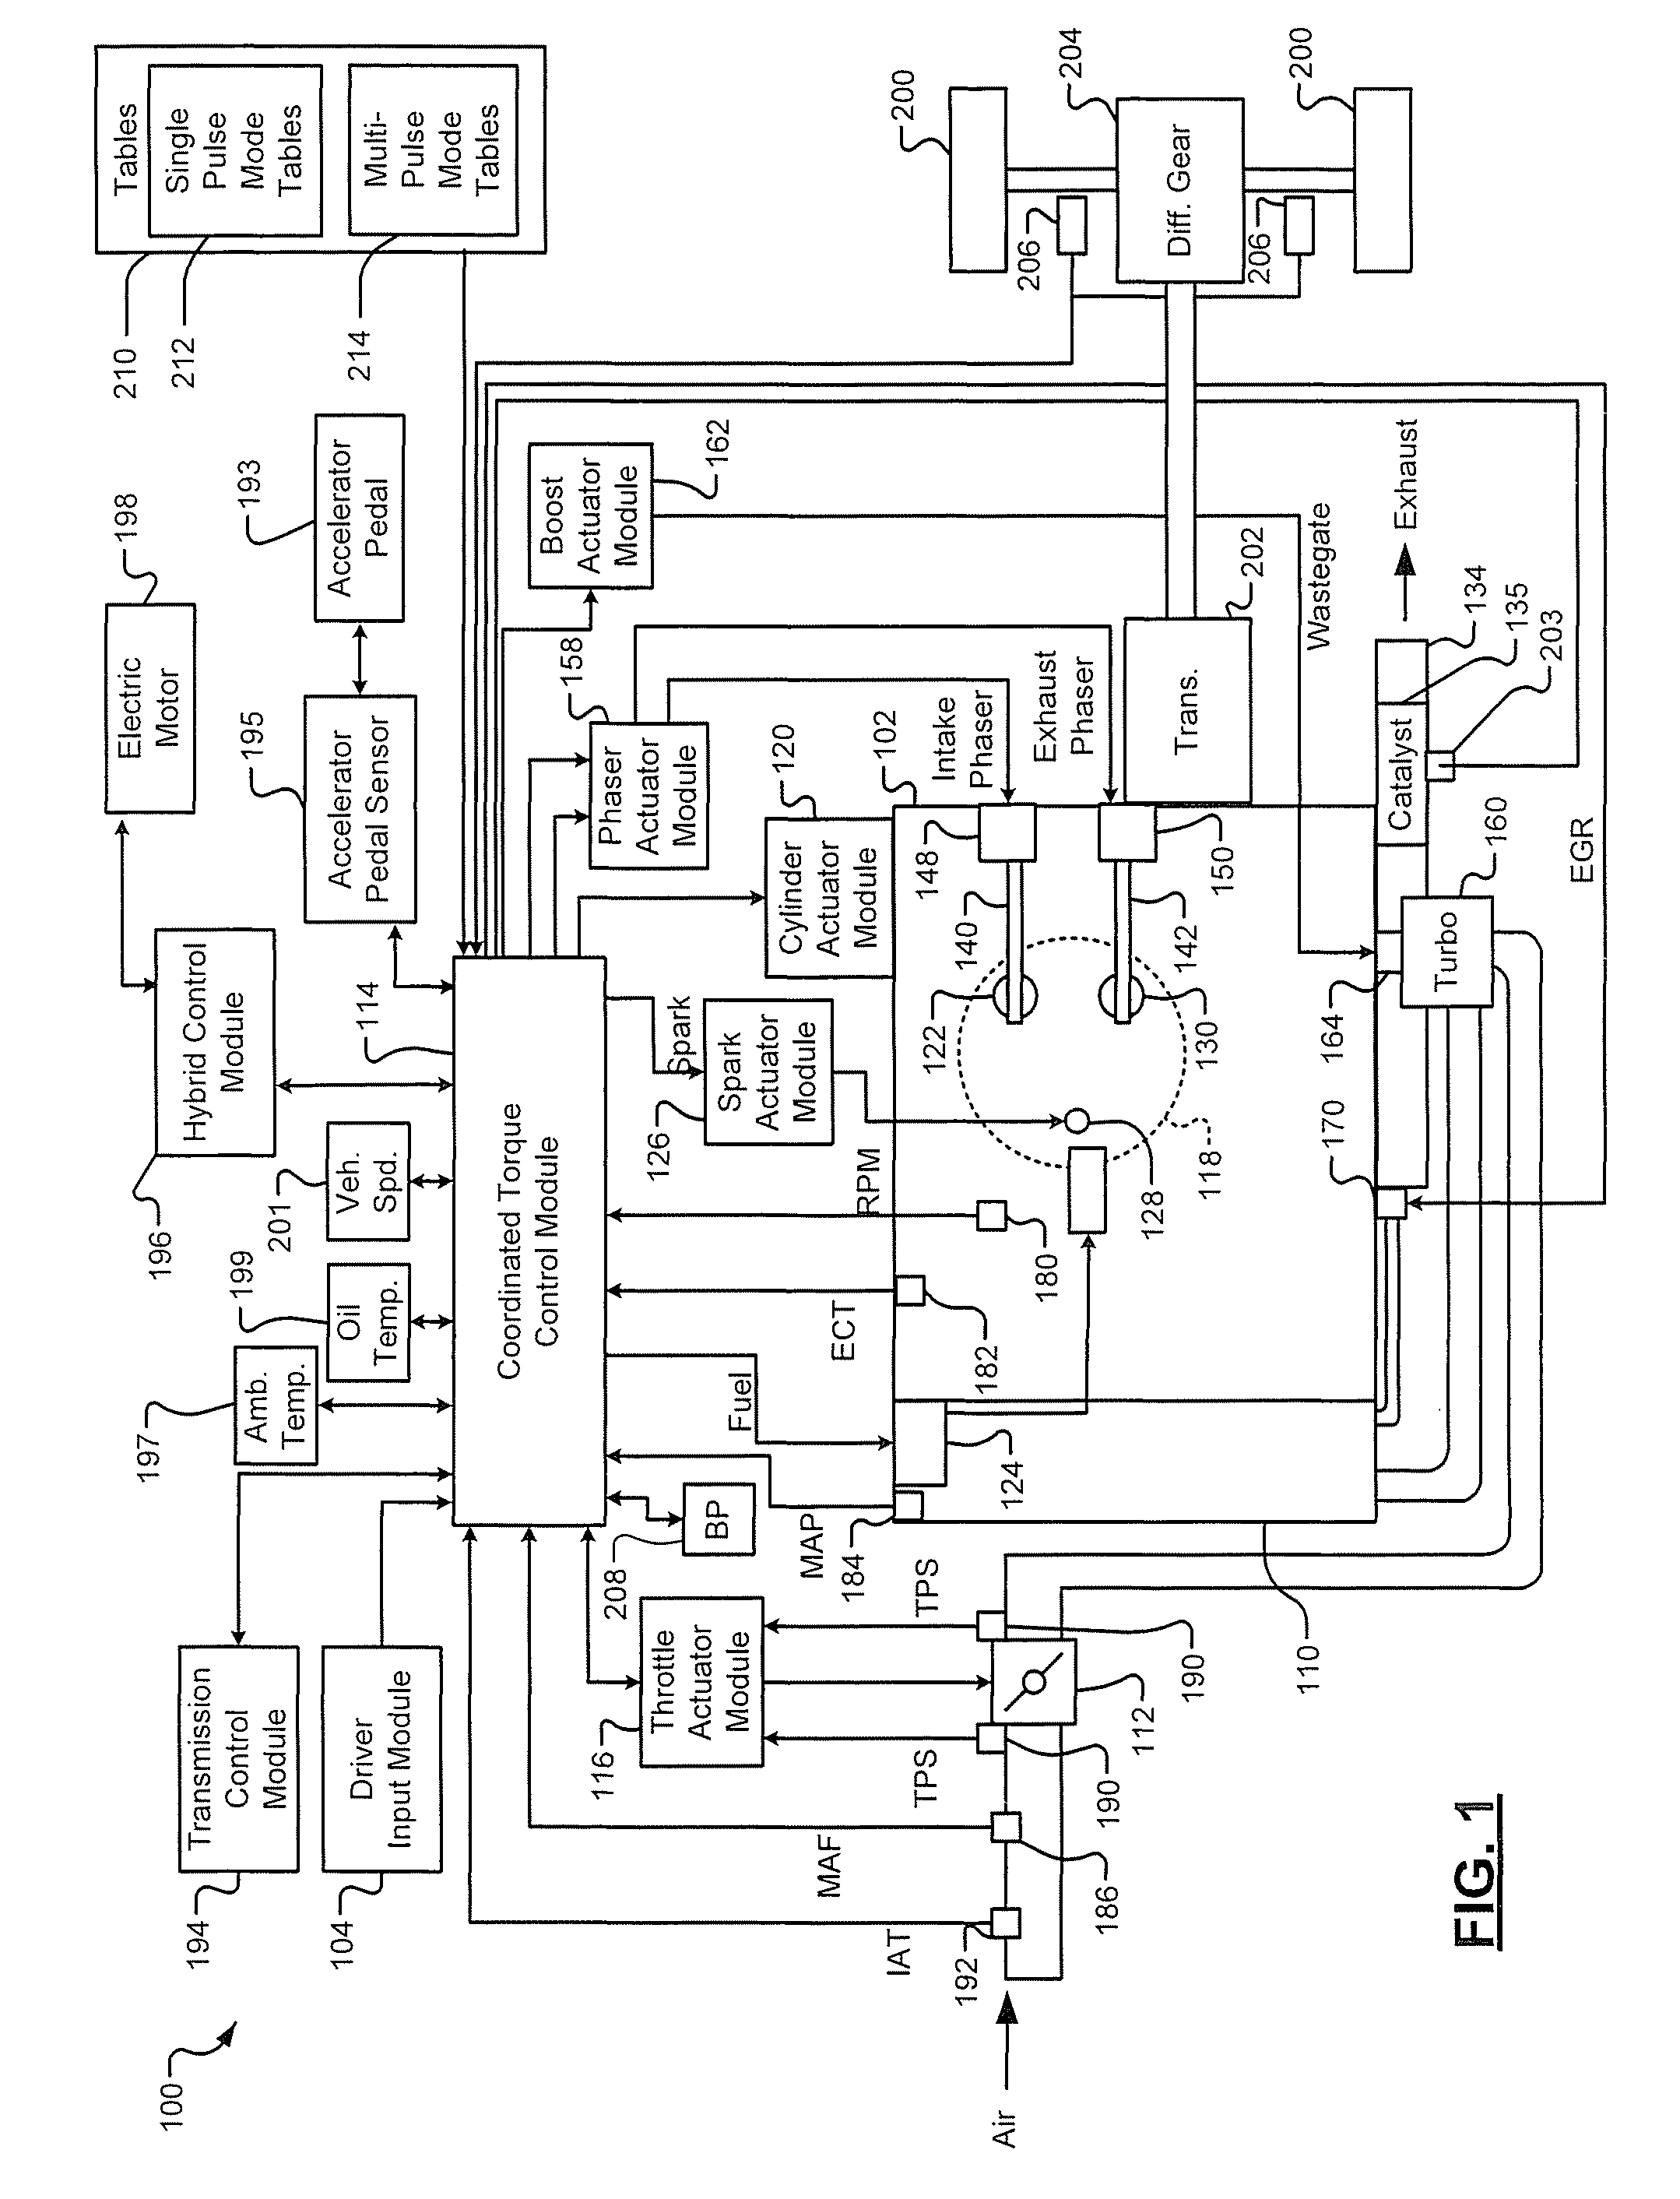 Torque reserve and emission control system for coordinated torque control